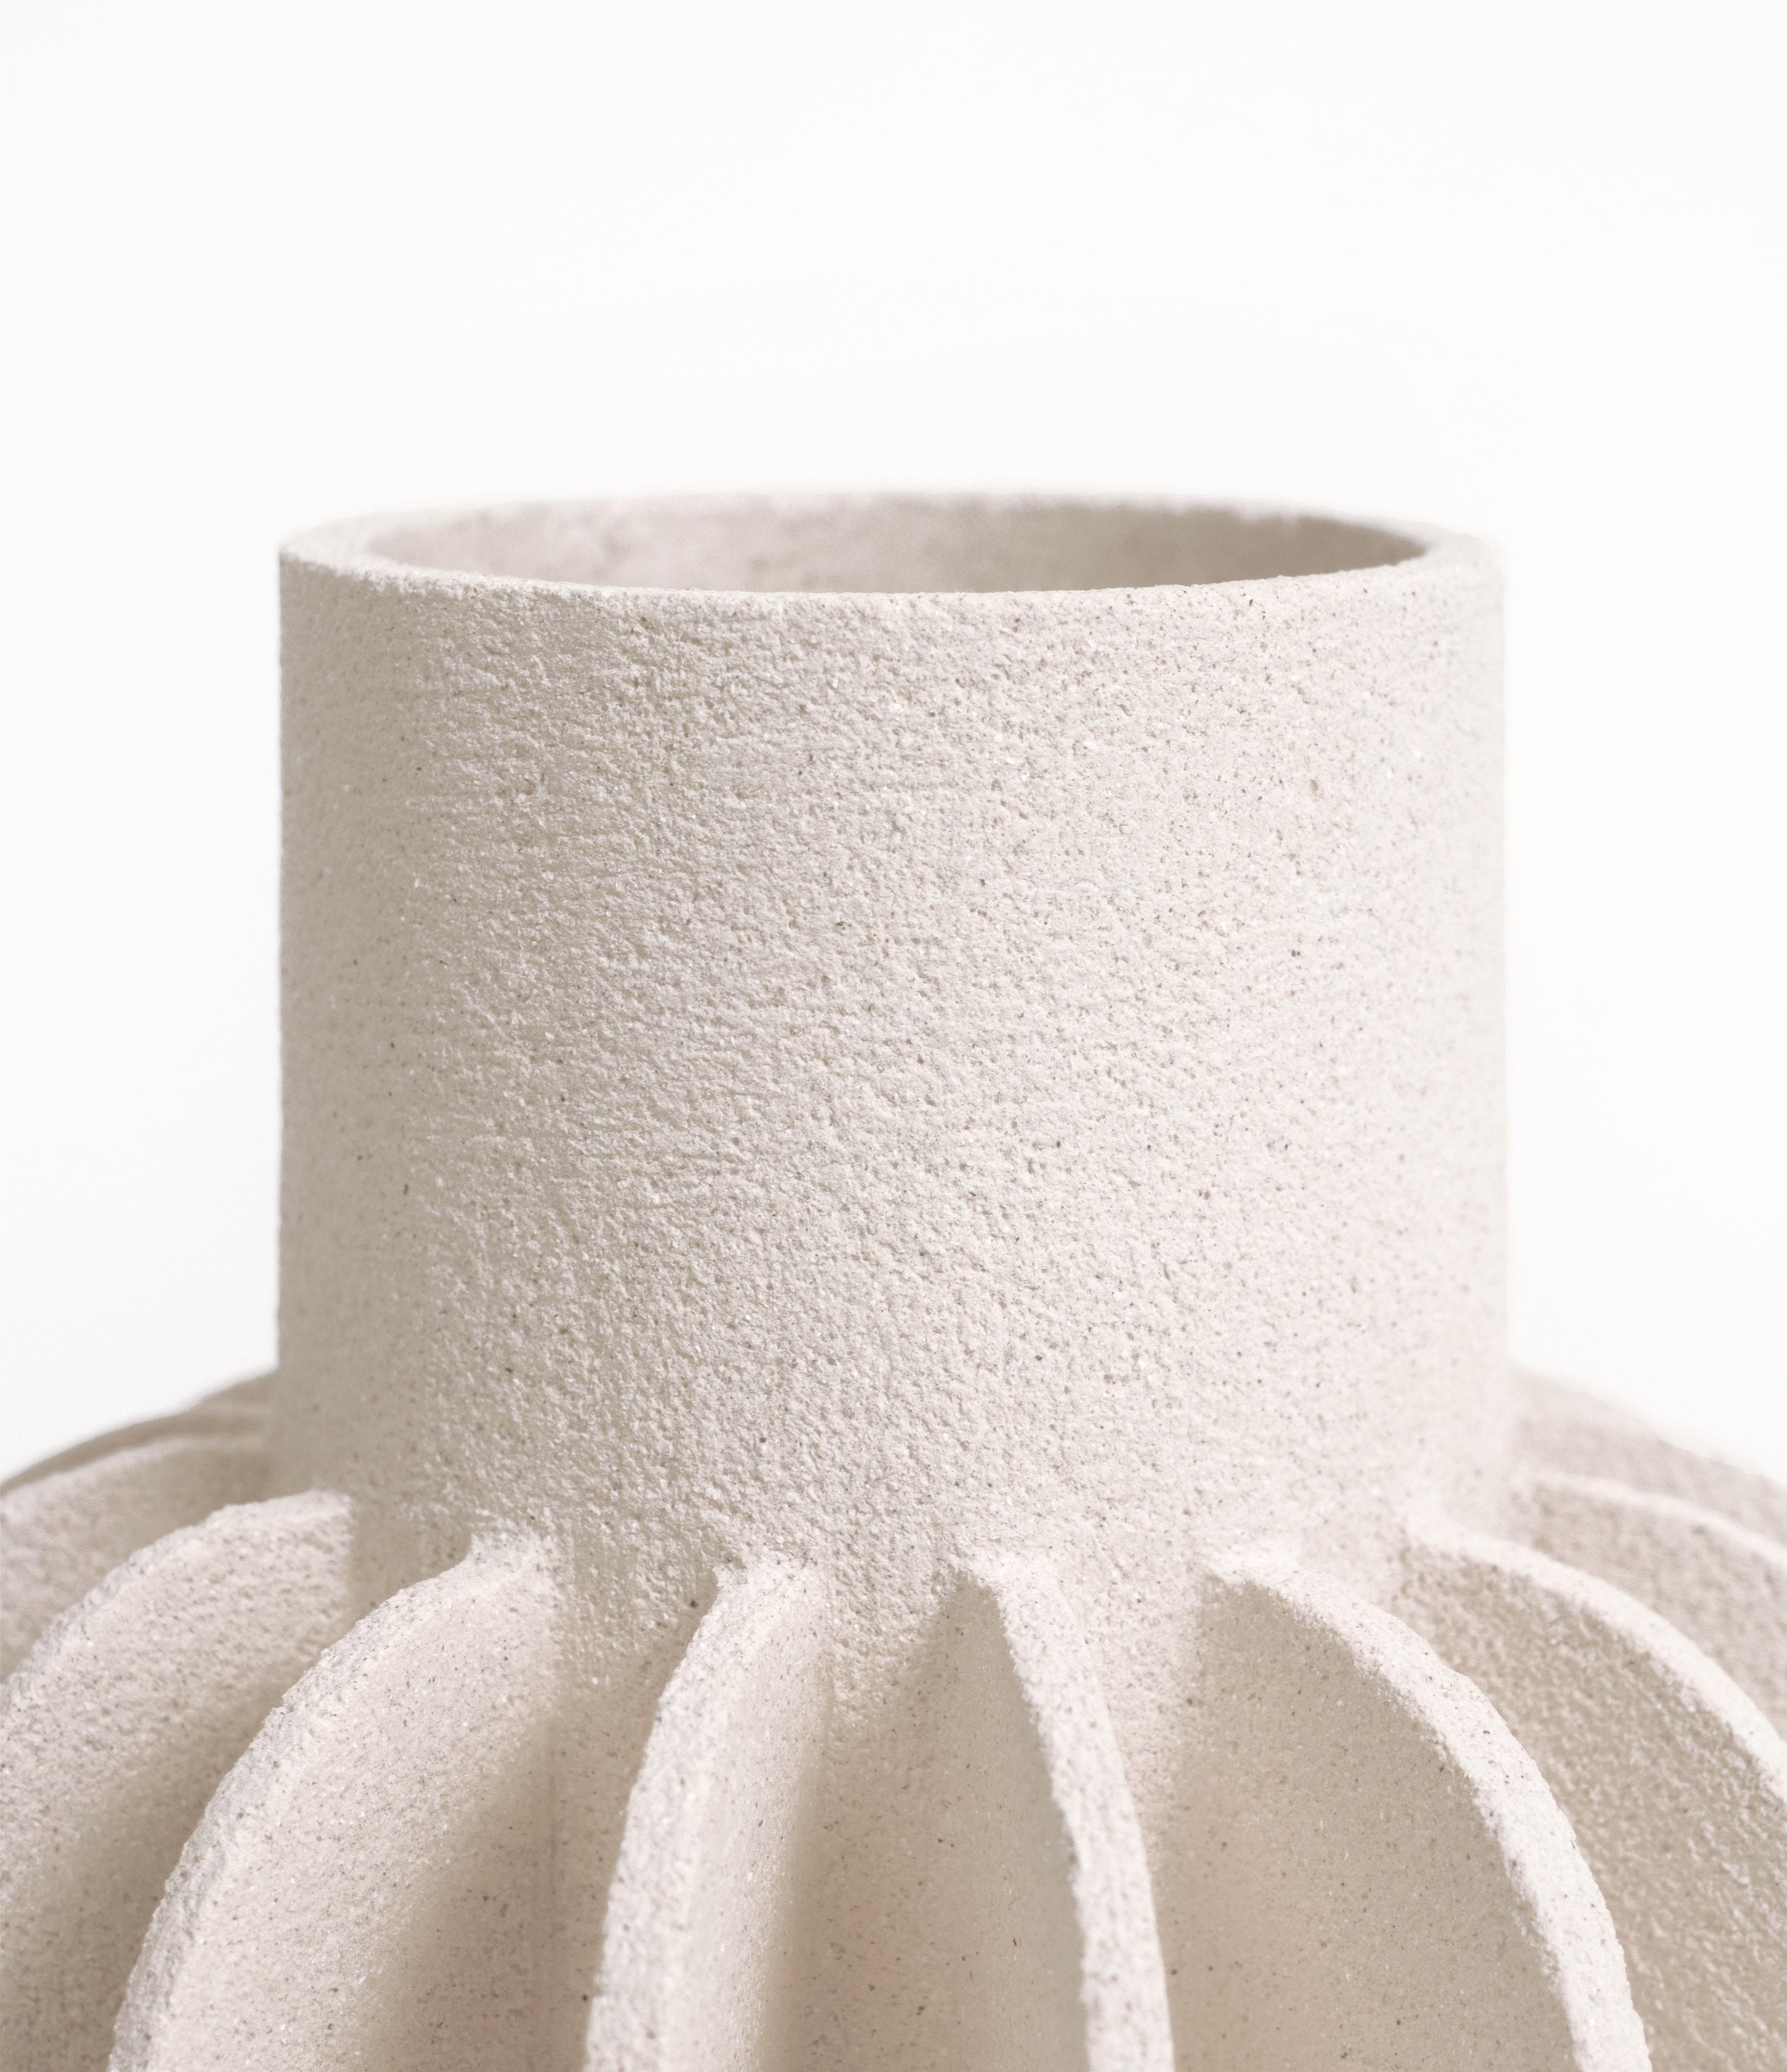 Minimalist 21st Century Mille-Pattes N°2 Vase in White Ceramic, Hand-Crafted in France